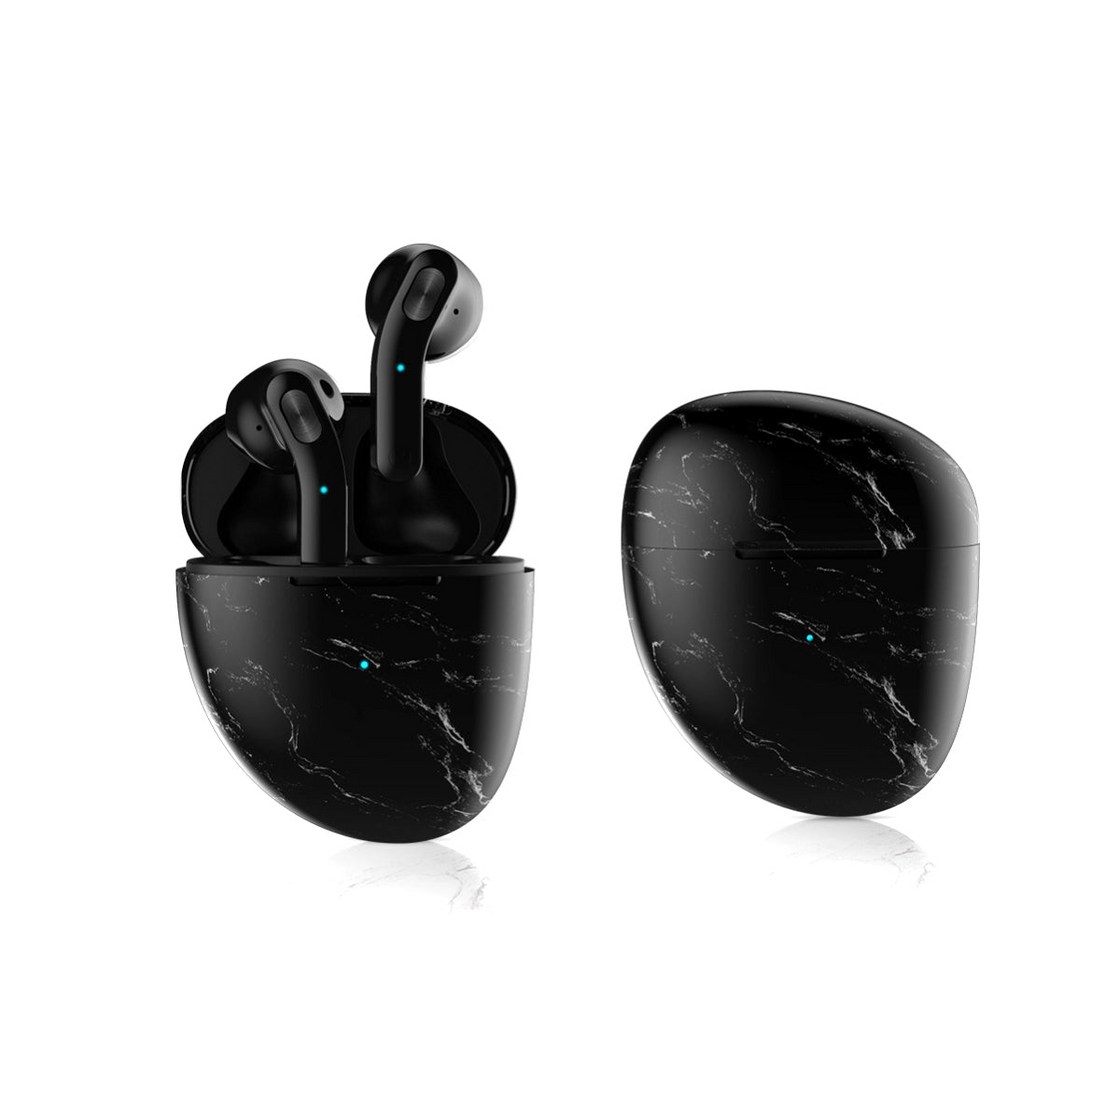 Marble Pebble Twin Bluetooth Headphones - High Definition Stereo Sound